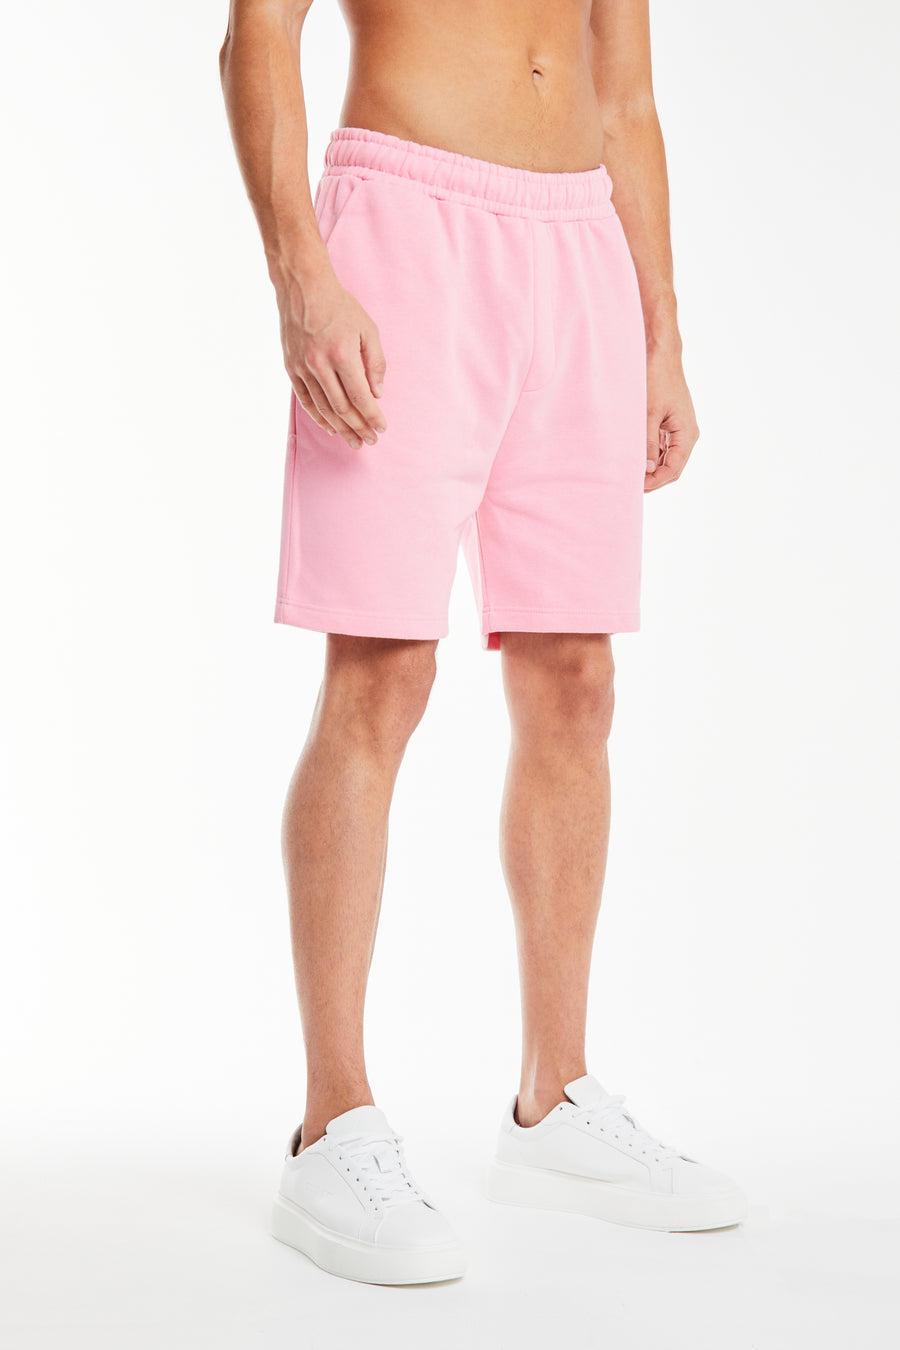 mens jersey shorts sale in baby pink